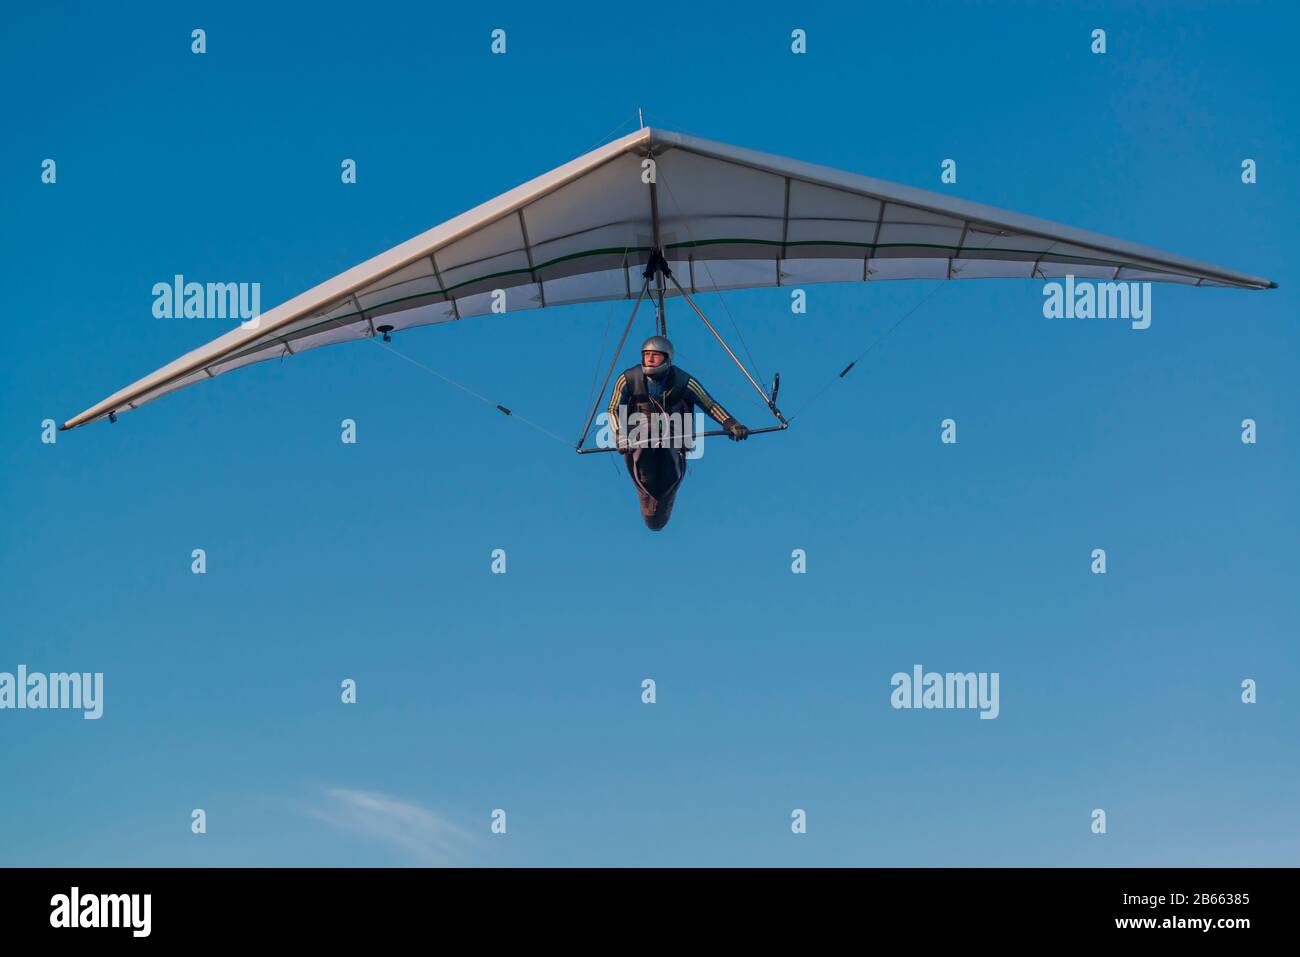 Hang glider pilot and his wing. Hangglider wing against bright blue sky. Stock Photo